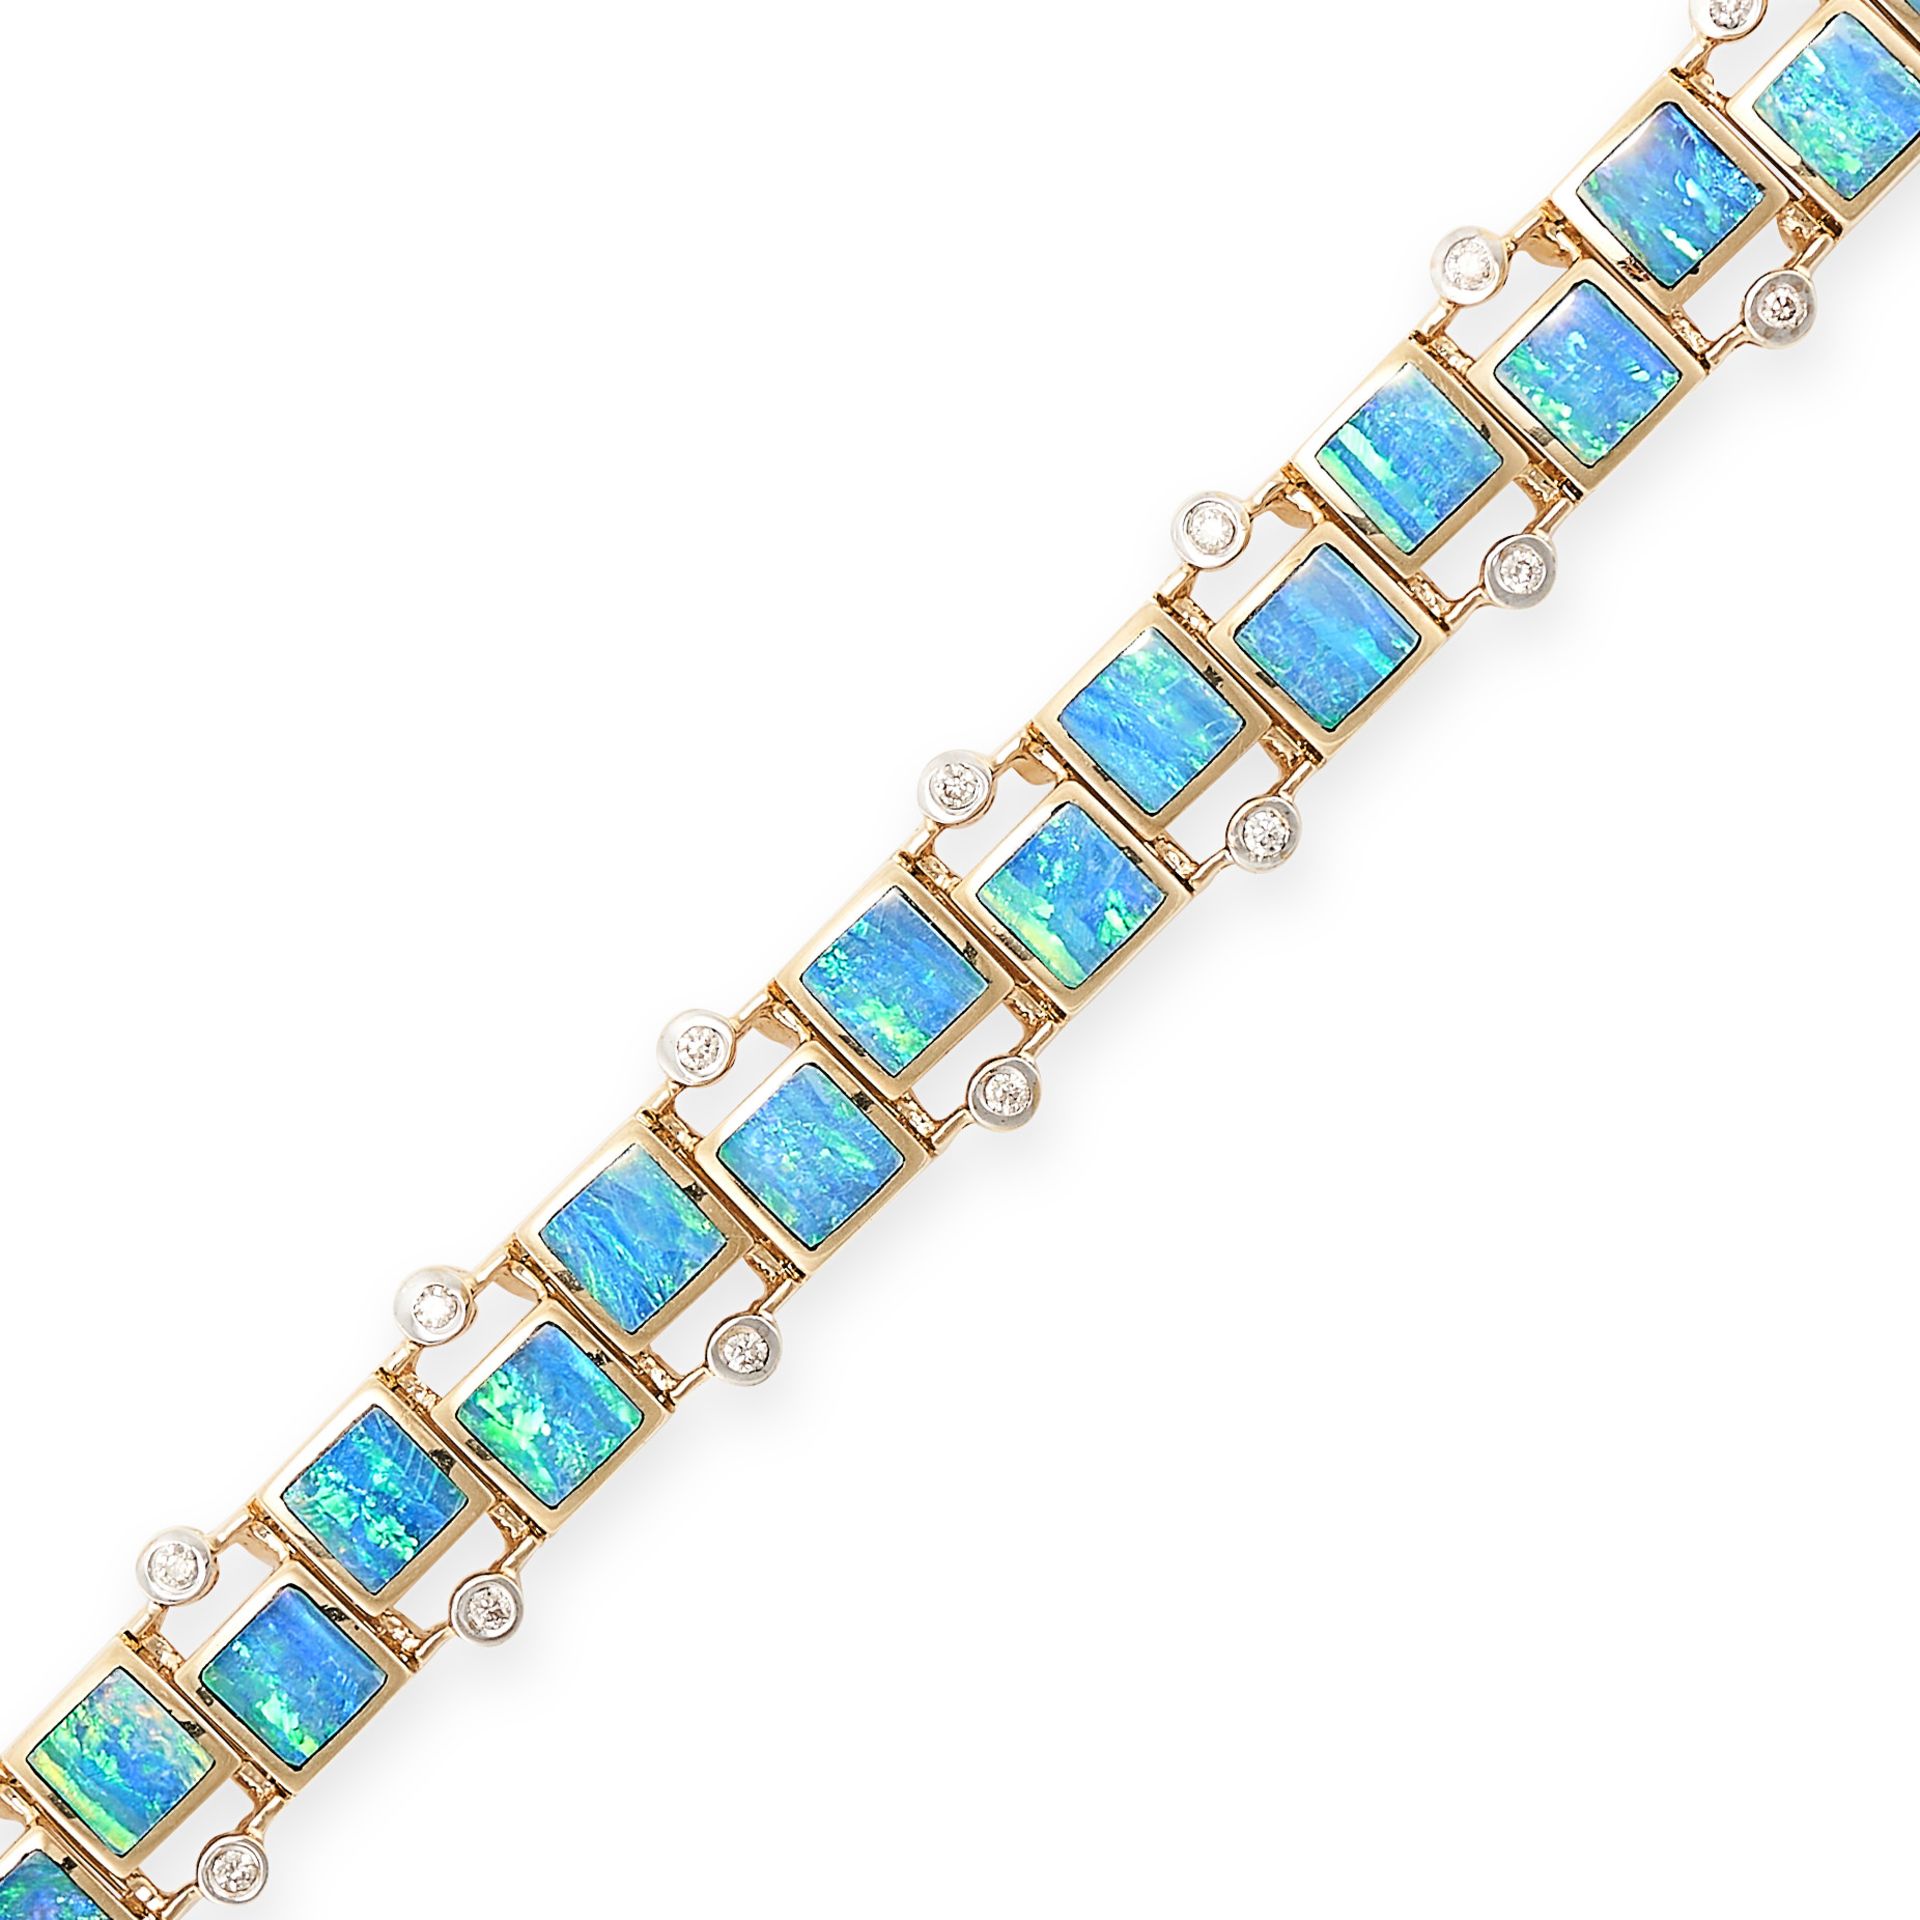 A BLACK OPAL AND DIAMOND BRACELET in 14ct yellow gold, set with a series of square opal slices ac...